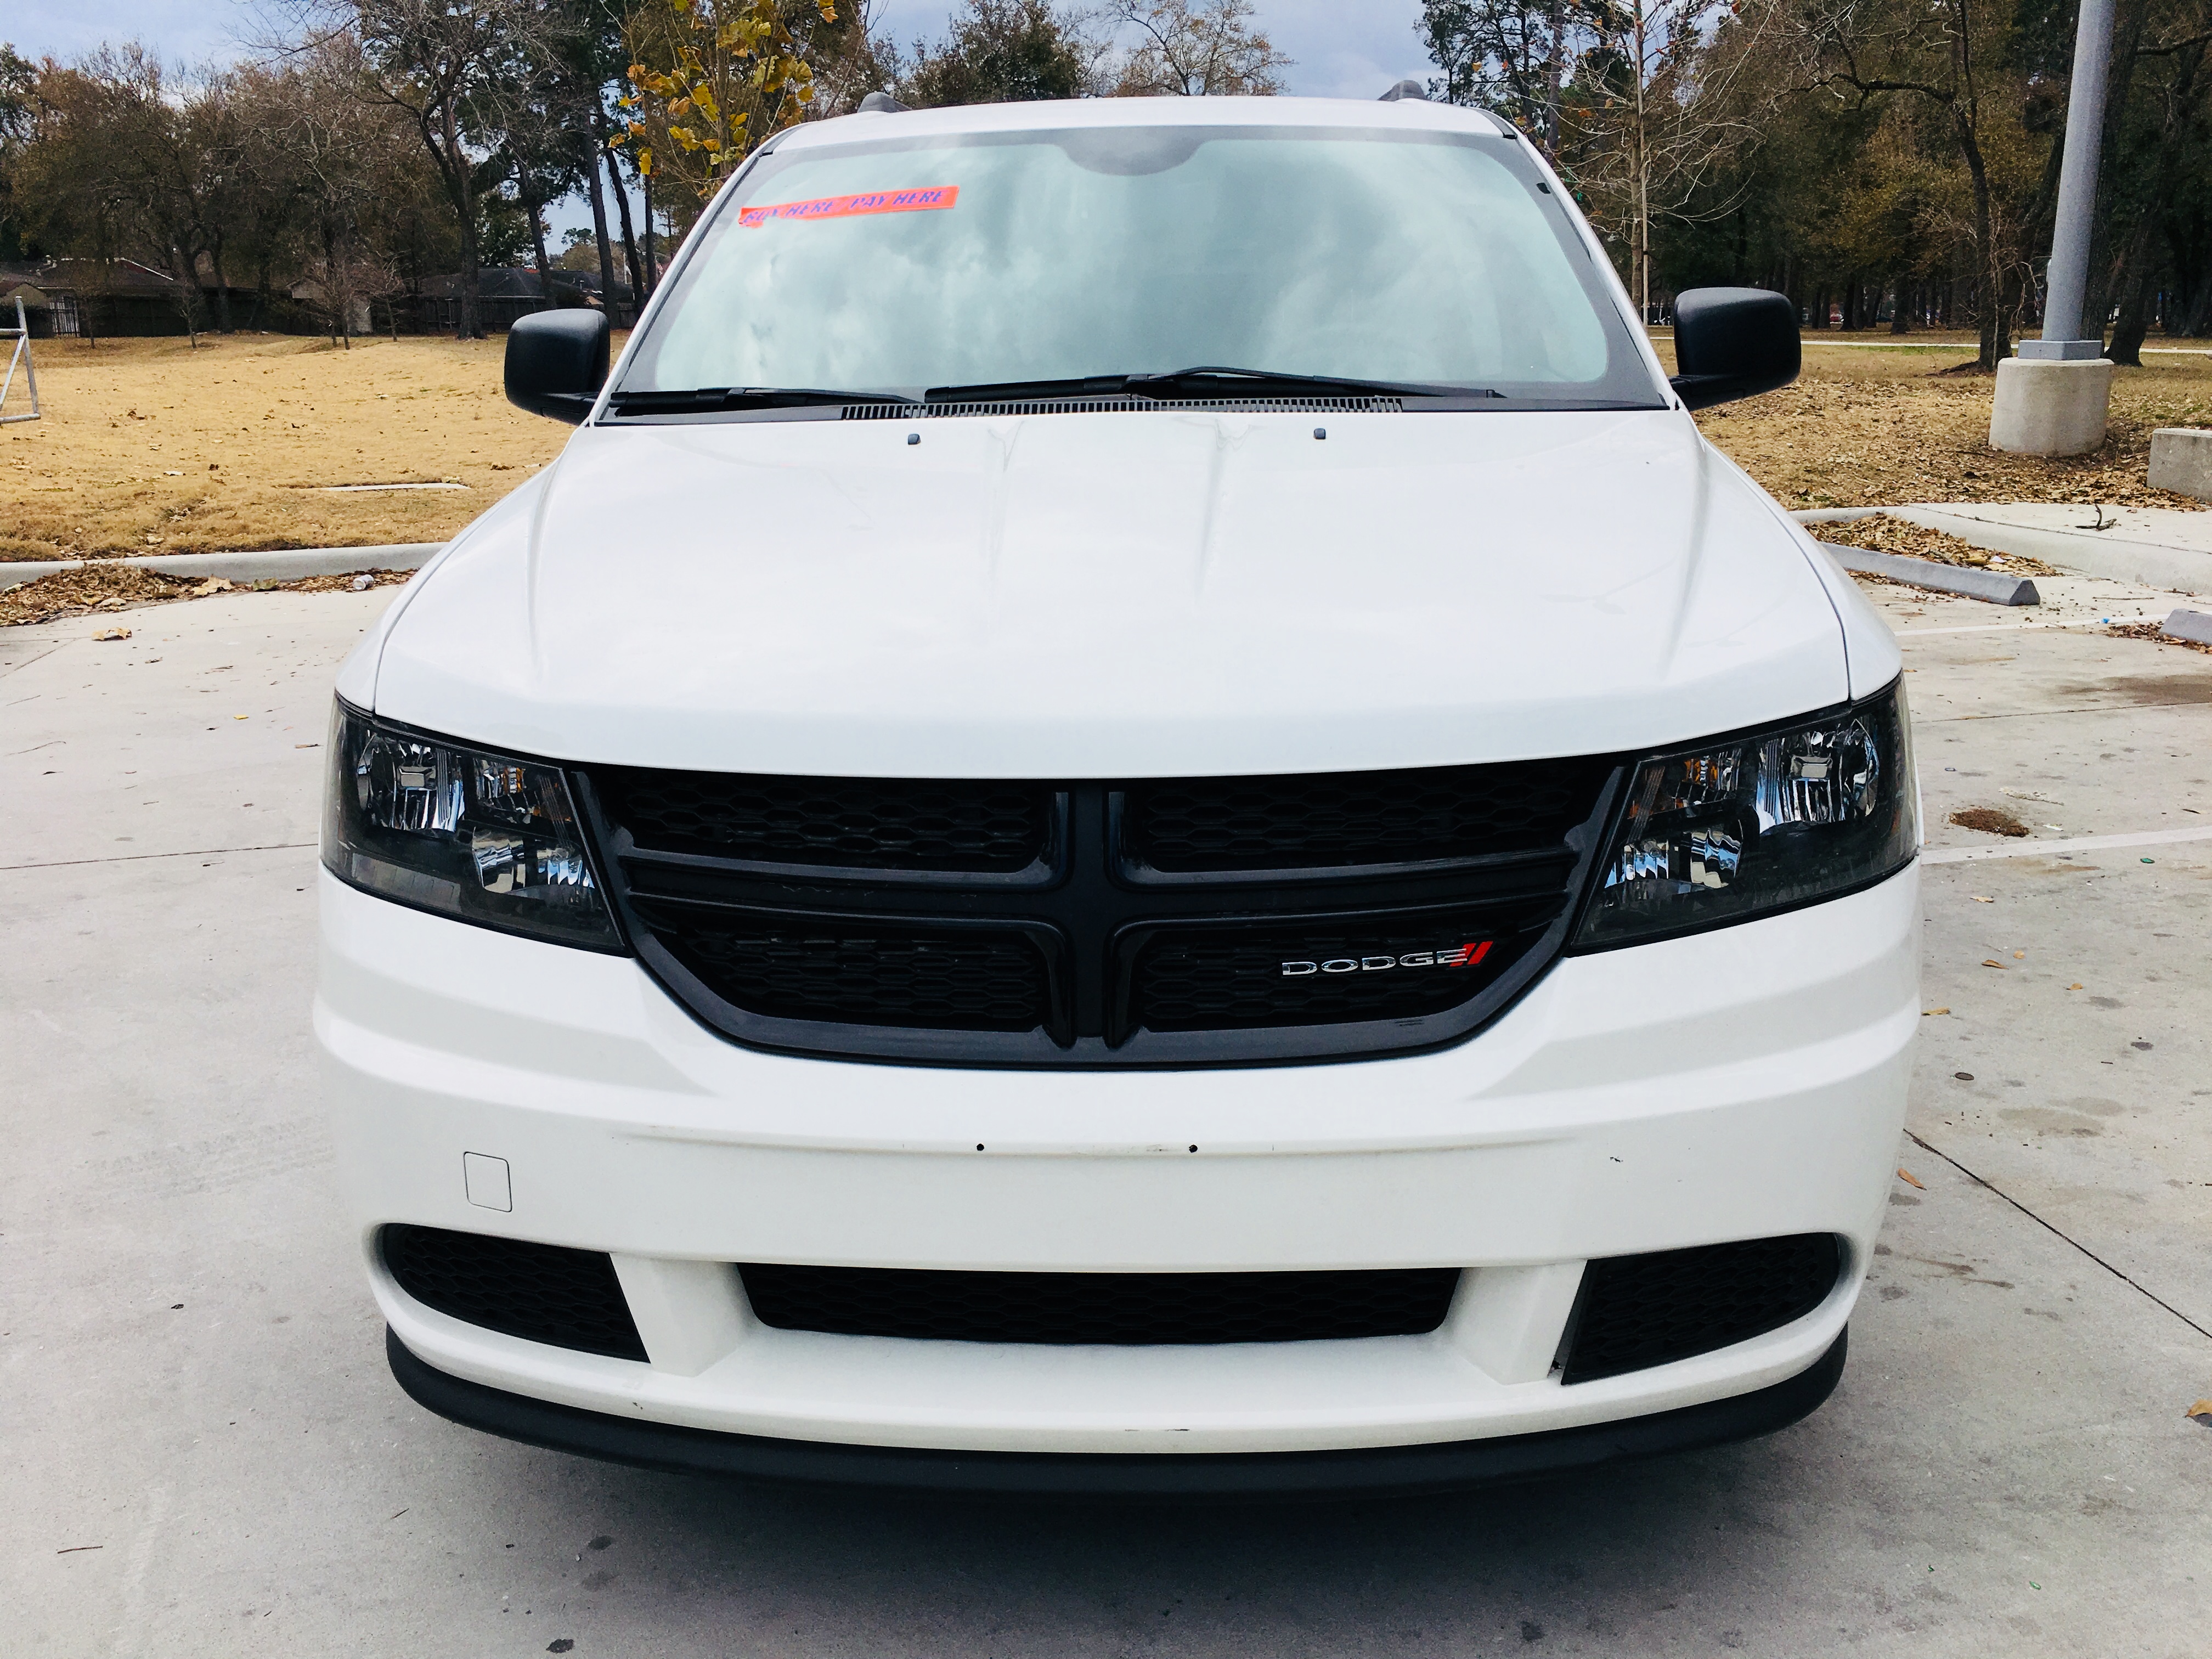 dodge journey grill